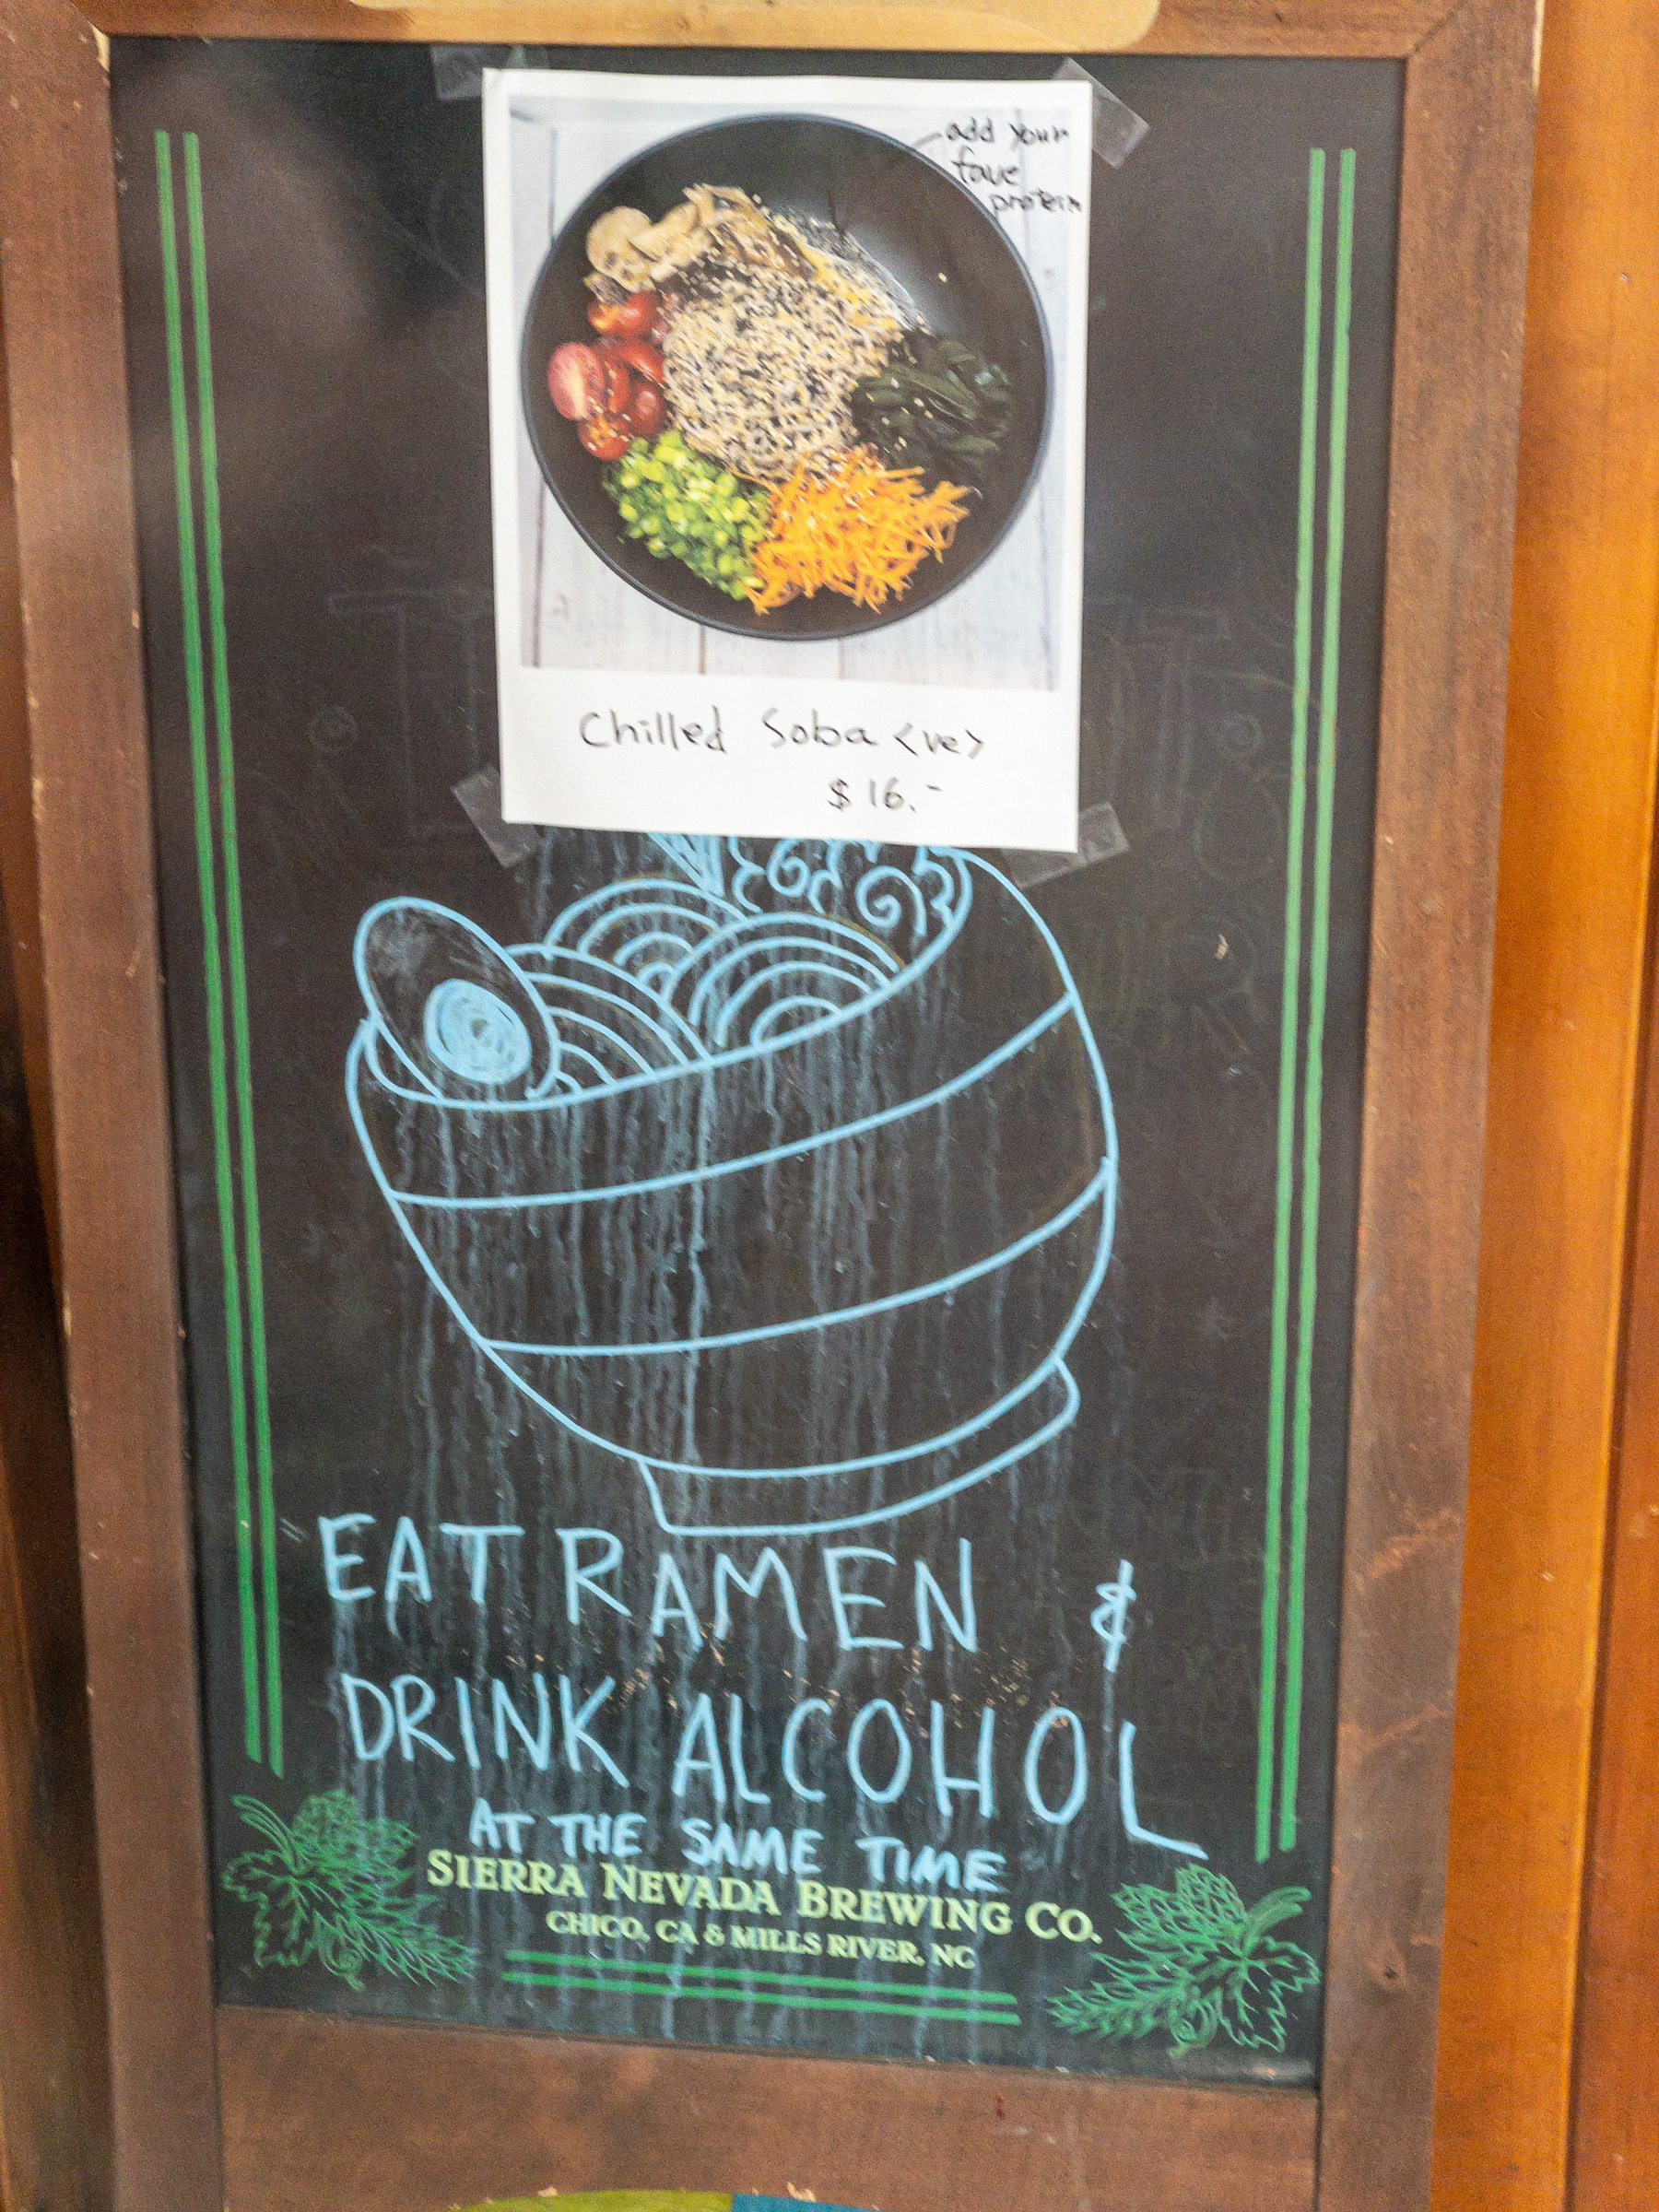 Chalk board sandwich sign with a picture of a bowl of ramen taped to the top portion, a drawing of a bowl of ramen below the picture and the words “EAT RAMEN &amp; DRINK ALCOHOL AT THE SAME TIME” written in capital letters below that.